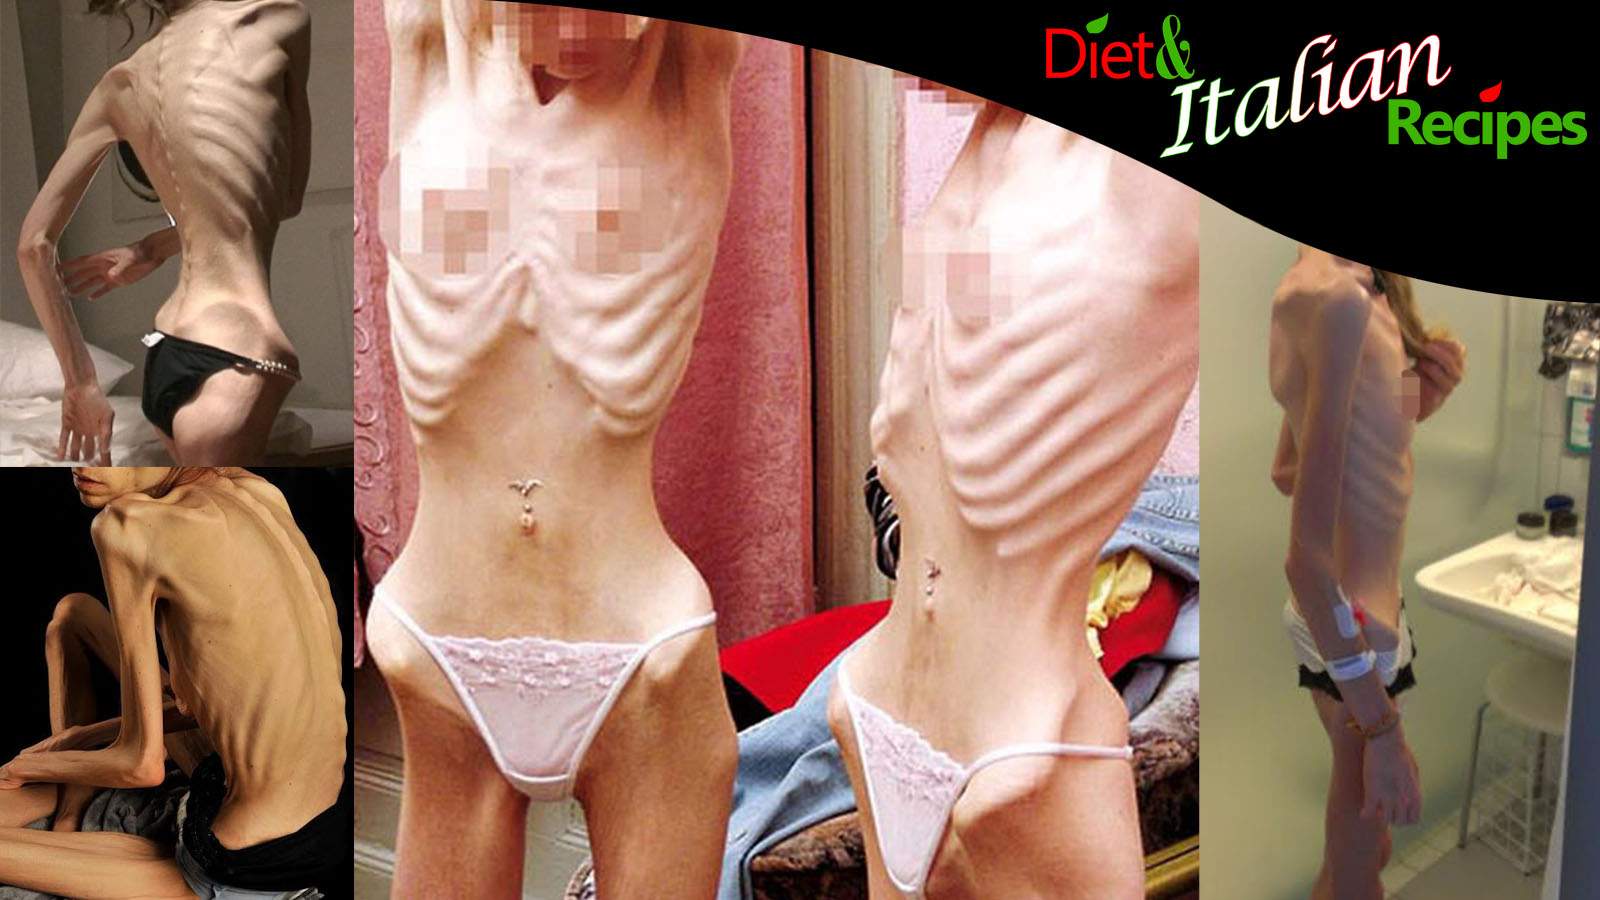 anorexic women consequences images